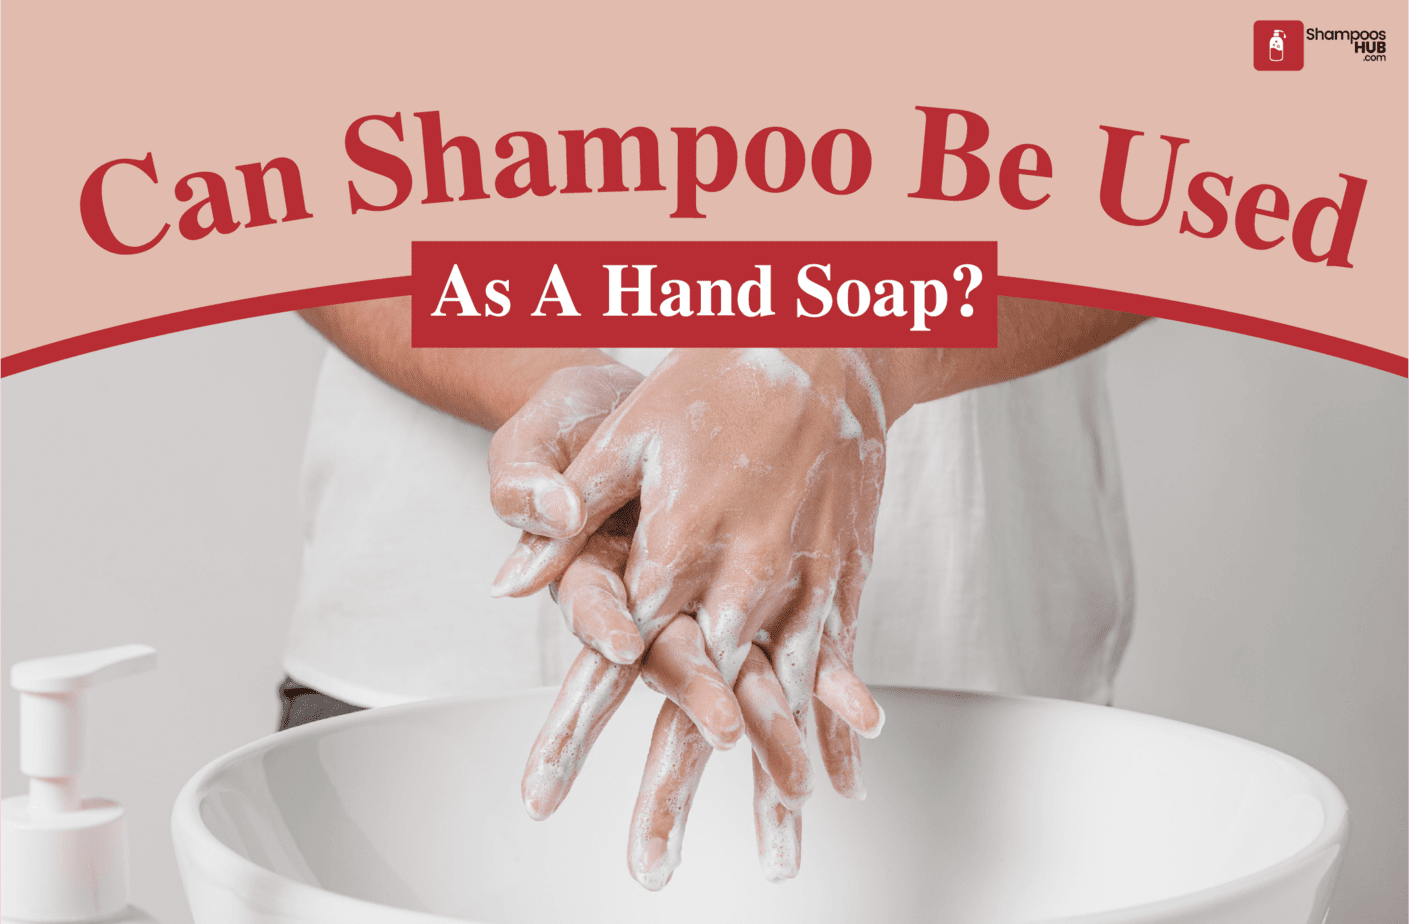 Can Shampoo Be Used As A Hand Soap?